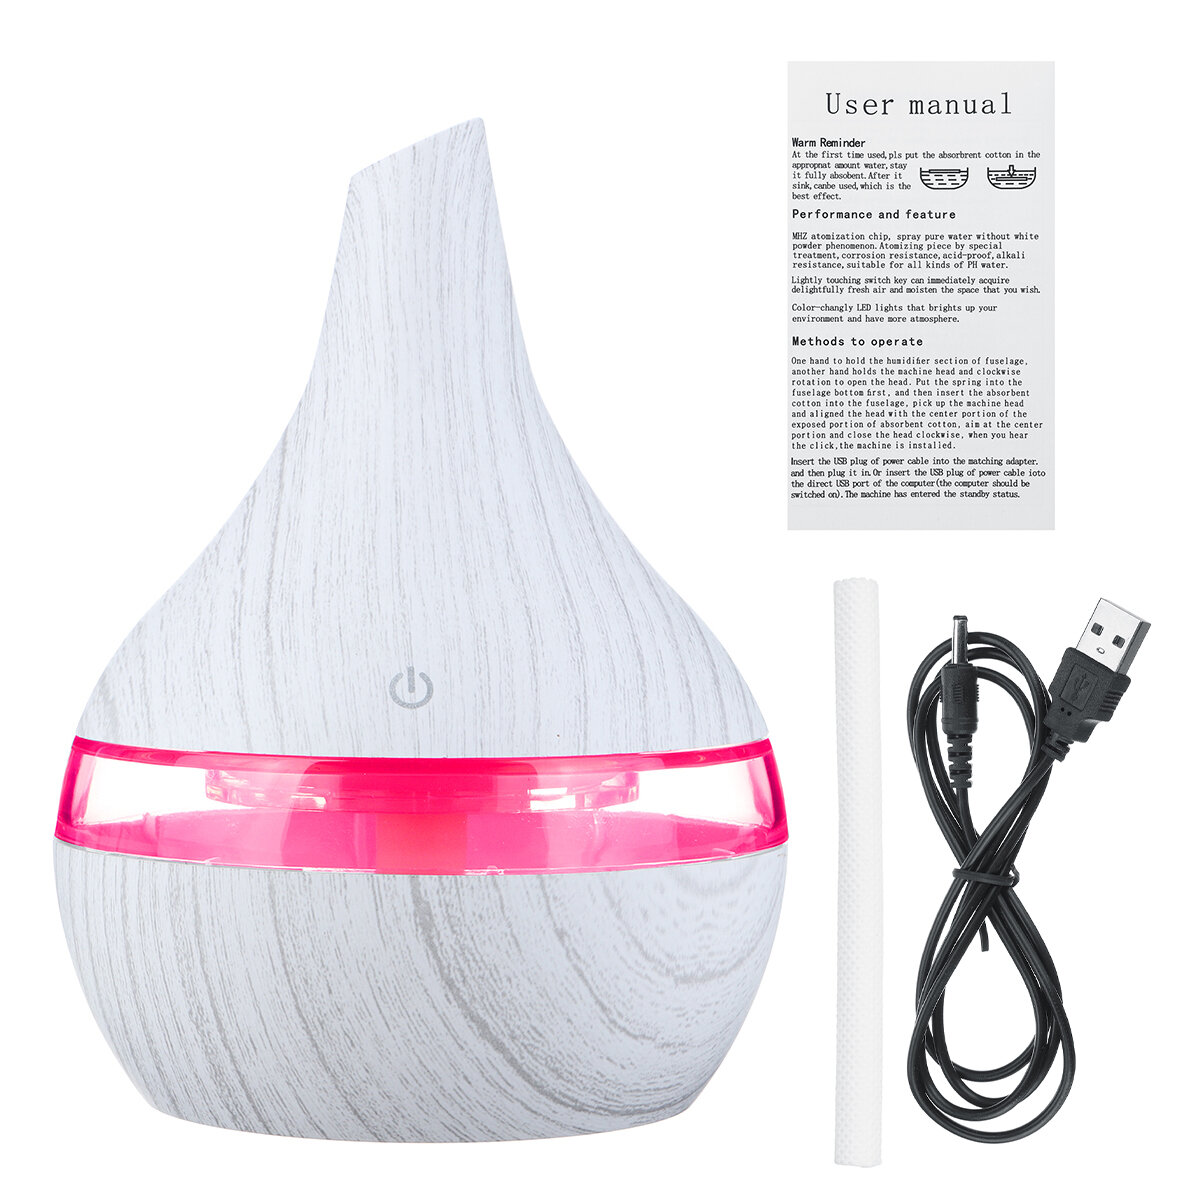 

300ml Ultrasonic Air Humidifier Aroma Essential Oil Diffuser Mist Maker with 7 Color LED Lights